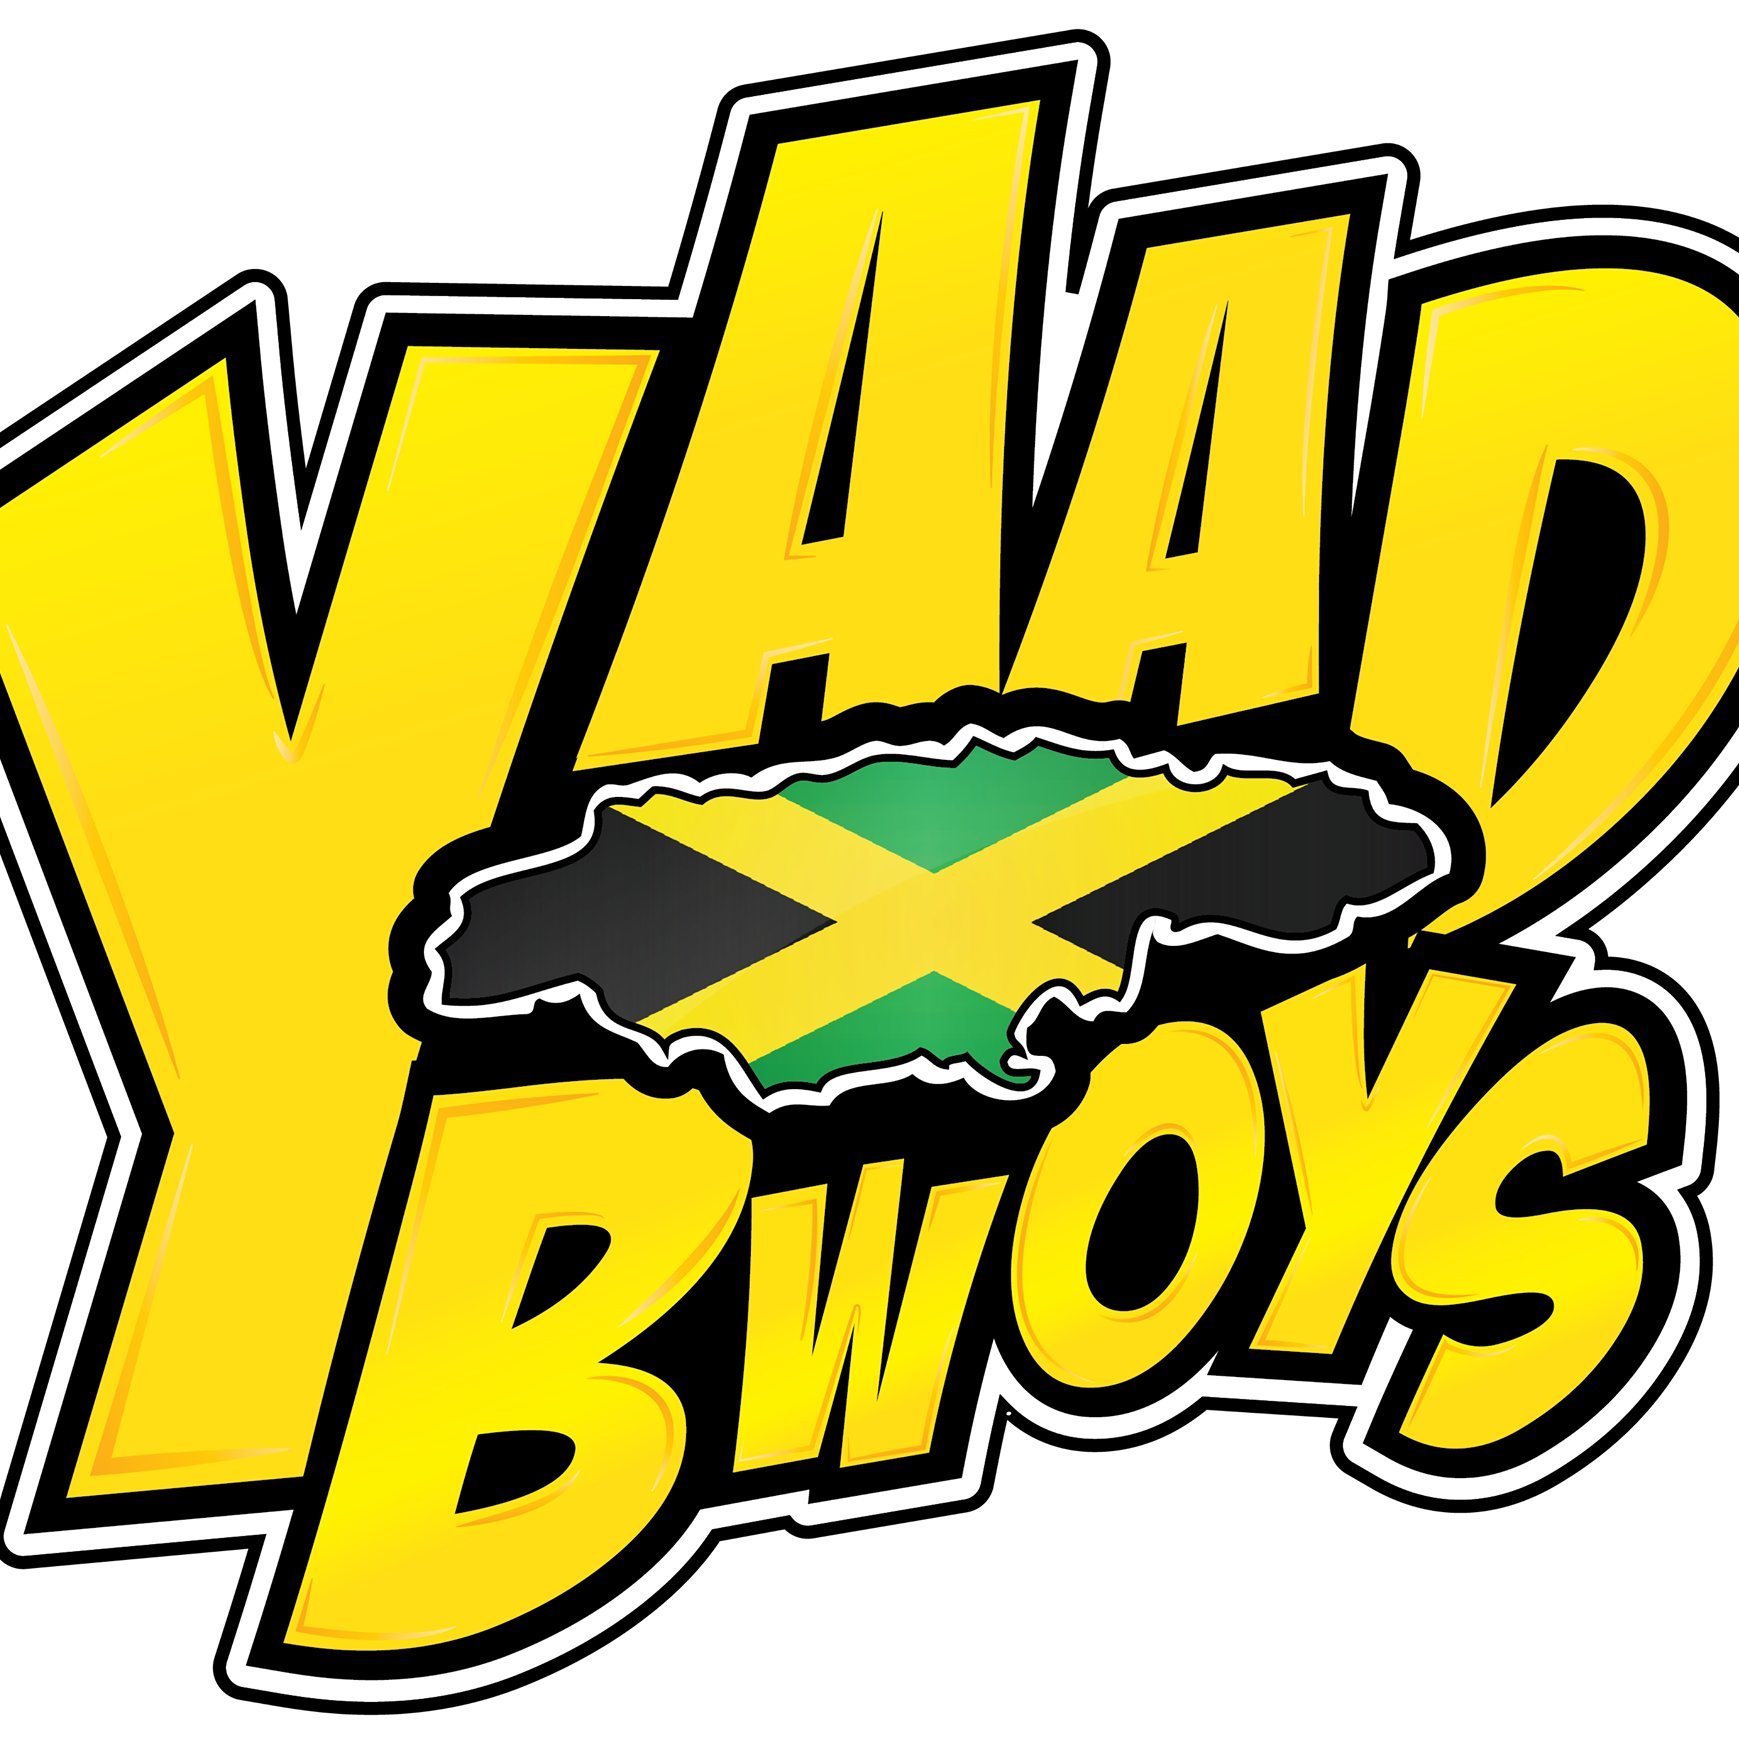 Official Twitter account of the YaadBwoys! https://t.co/YIpFieyyUk email: pryncevynce@gmail.com